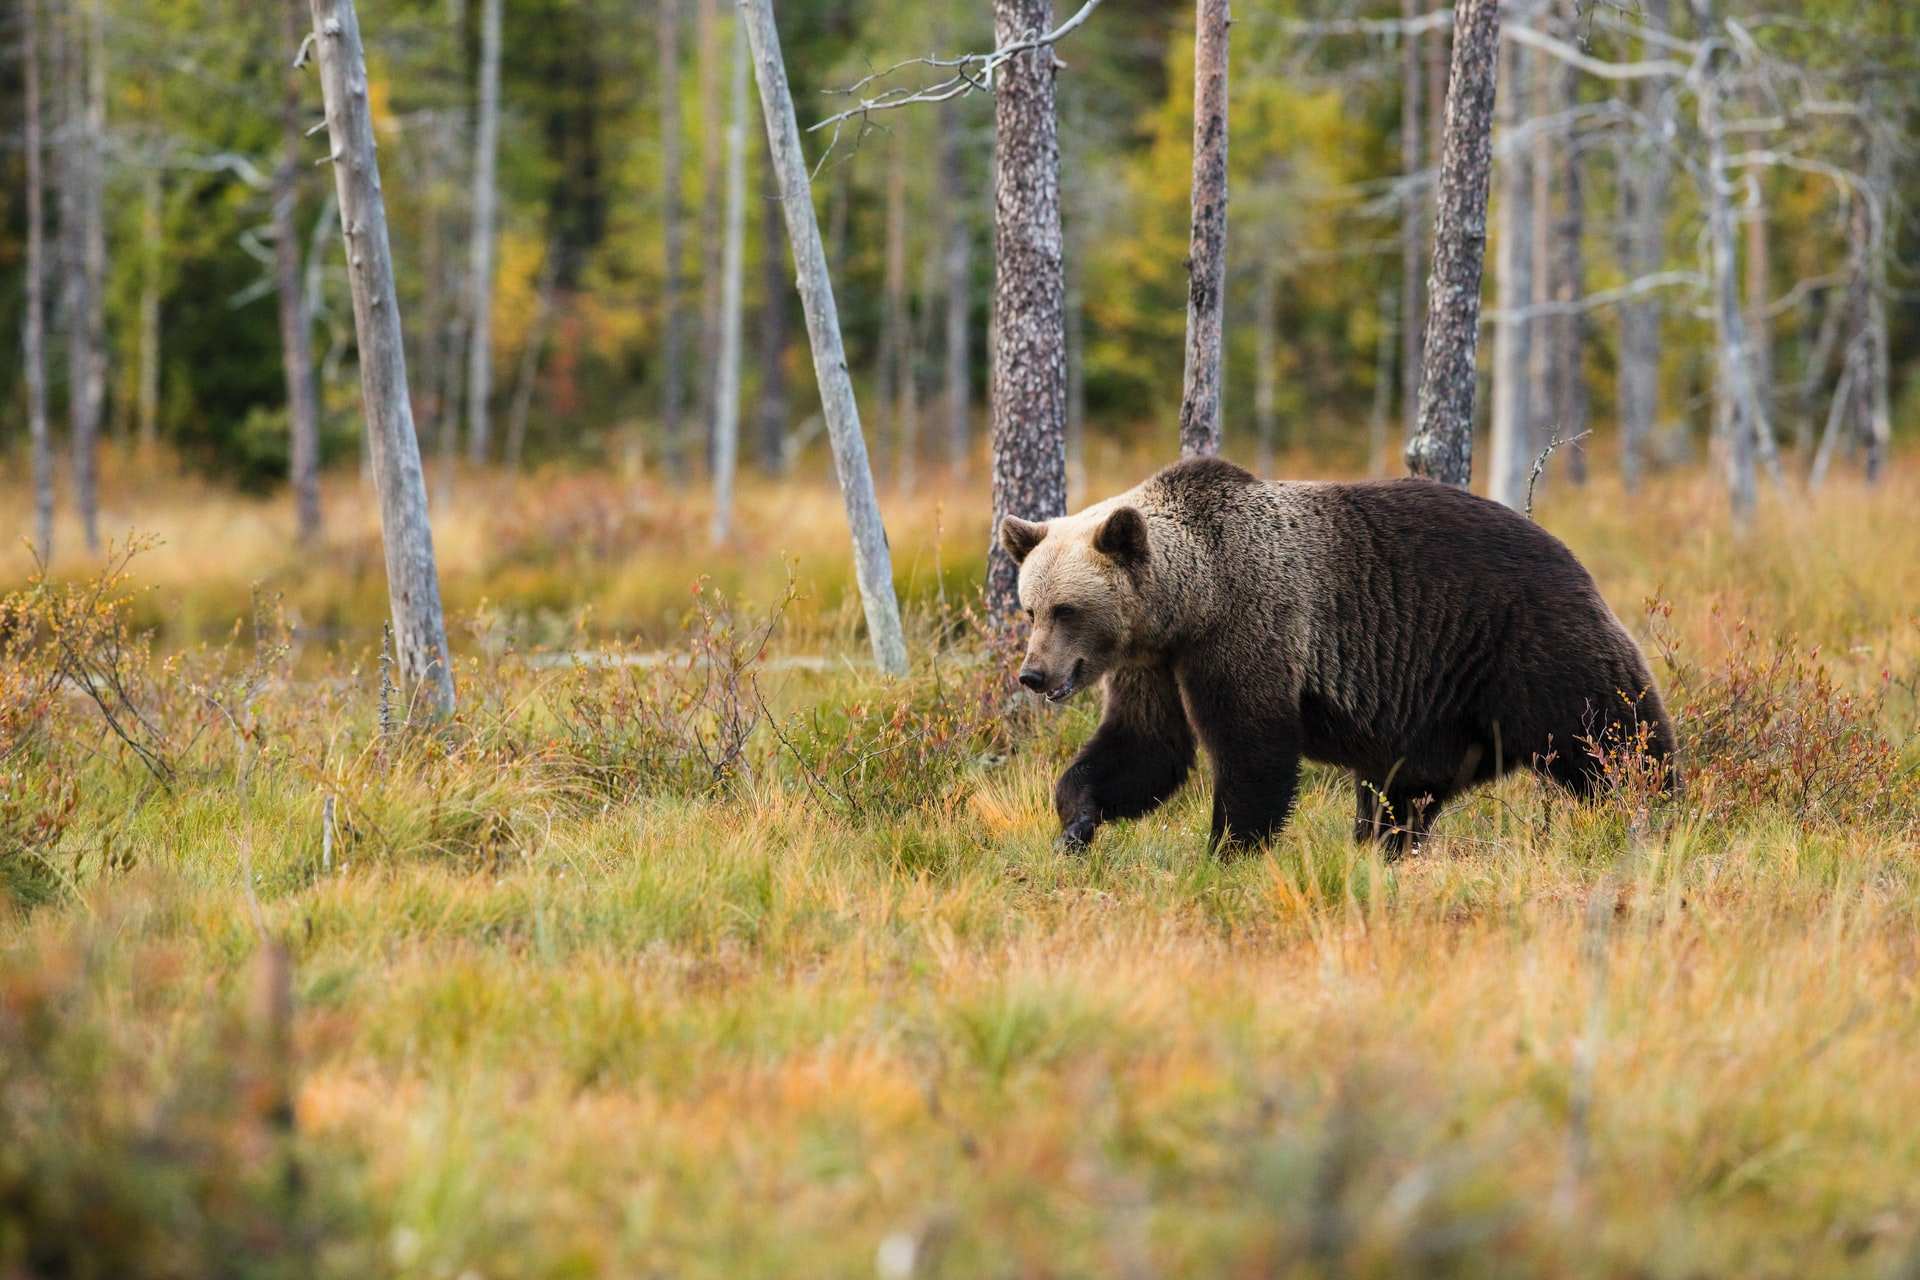 Hiking in the Bear Country: Tips to Stay Safe in the Wild